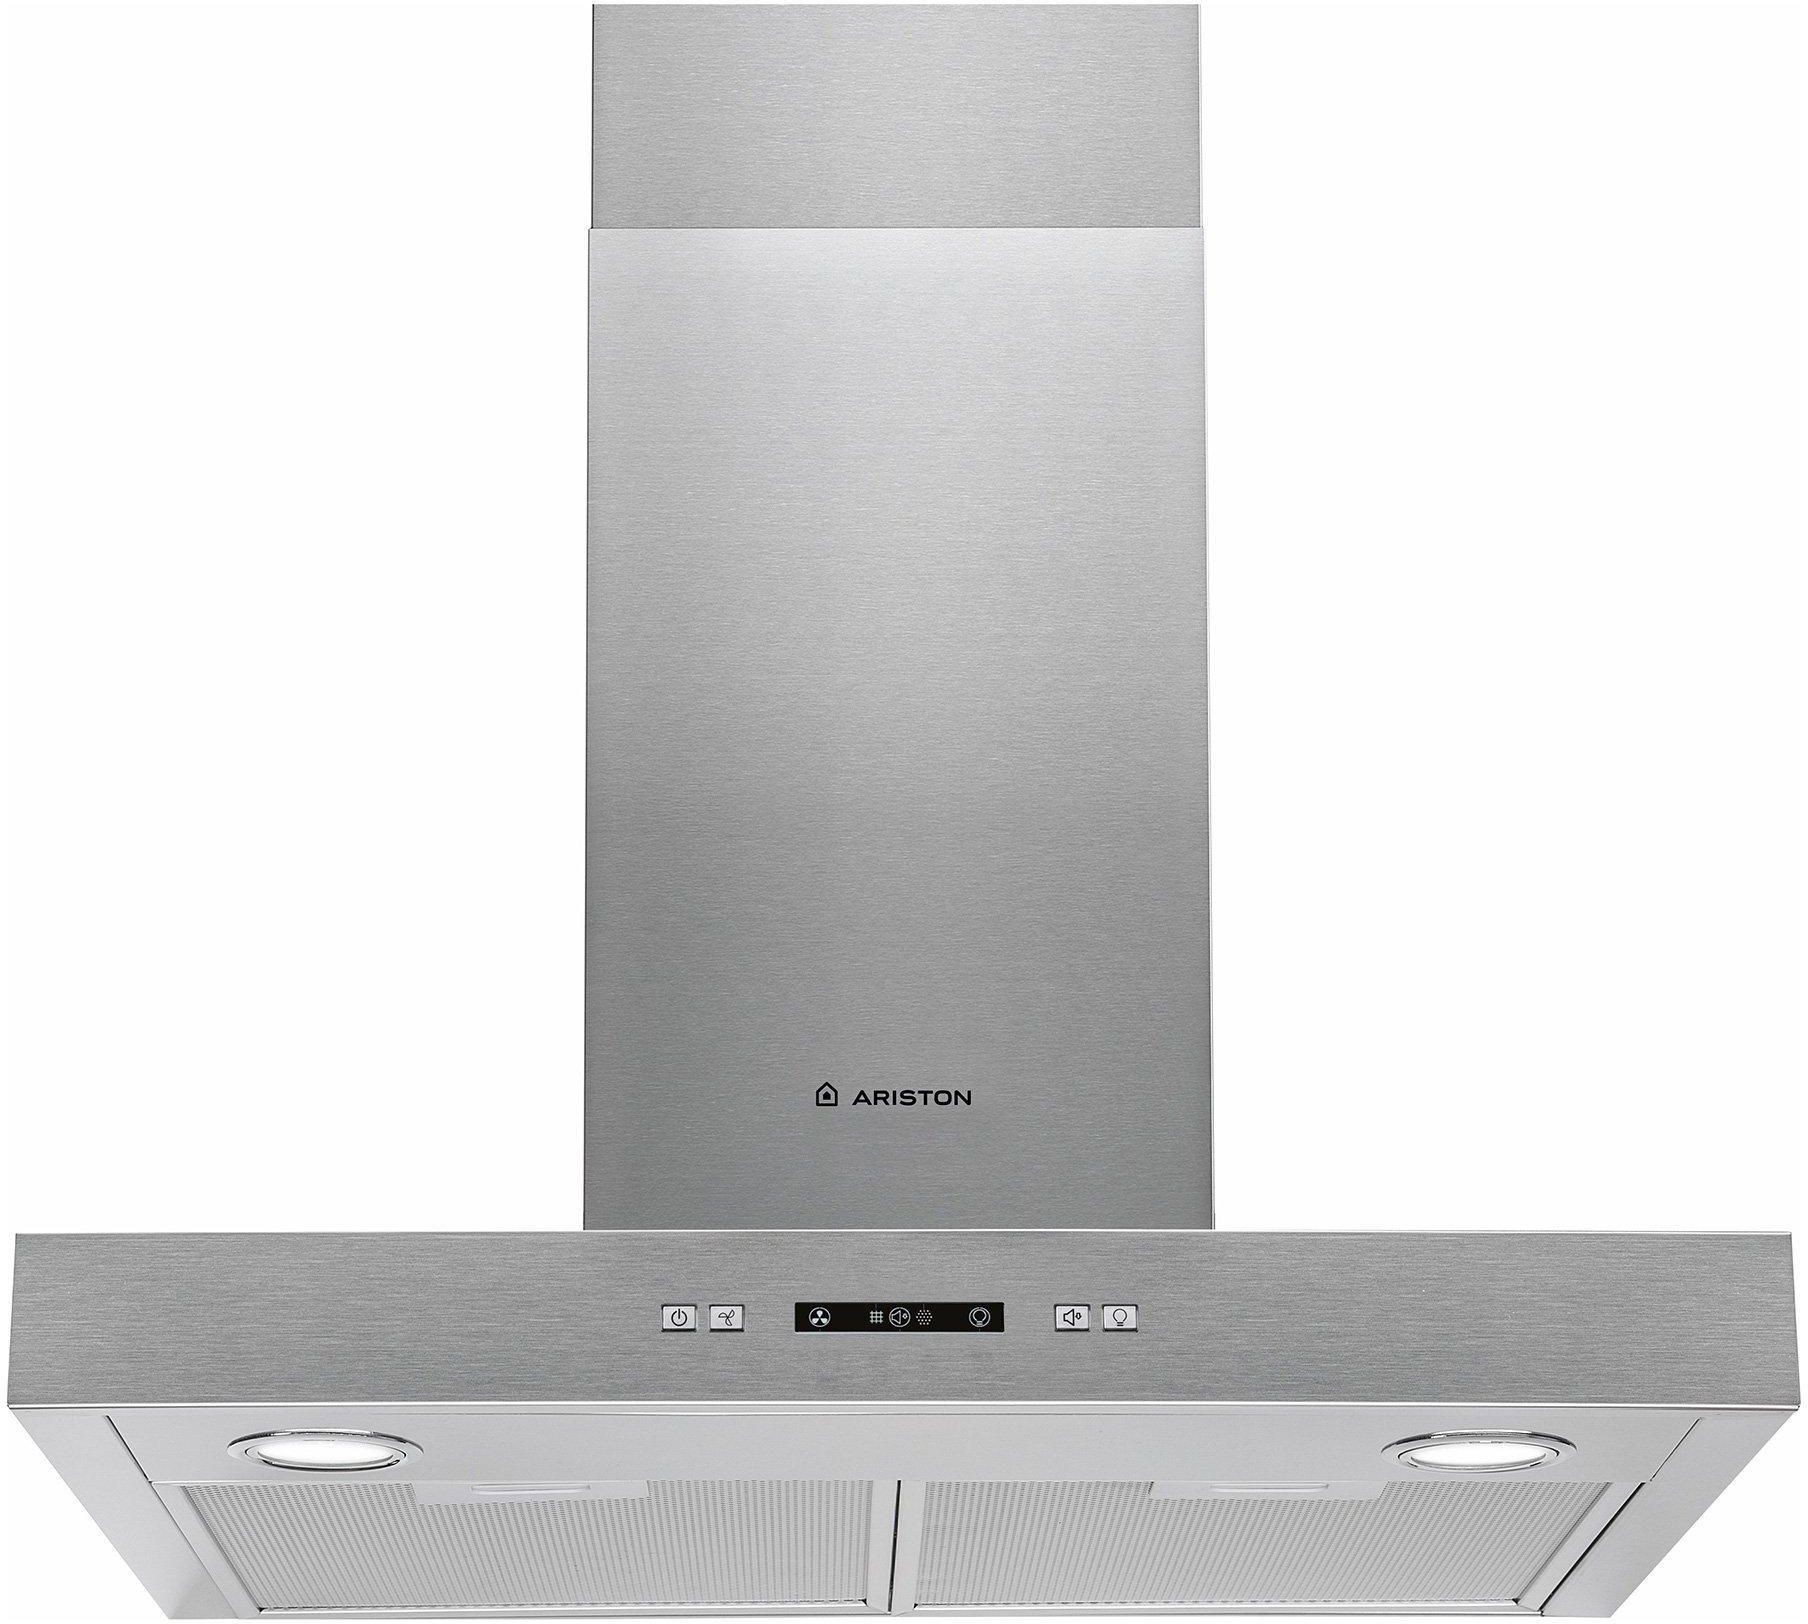 Ariston Wall Mounted Cooker Hood, 60cms, Carbon Filter, Inox.